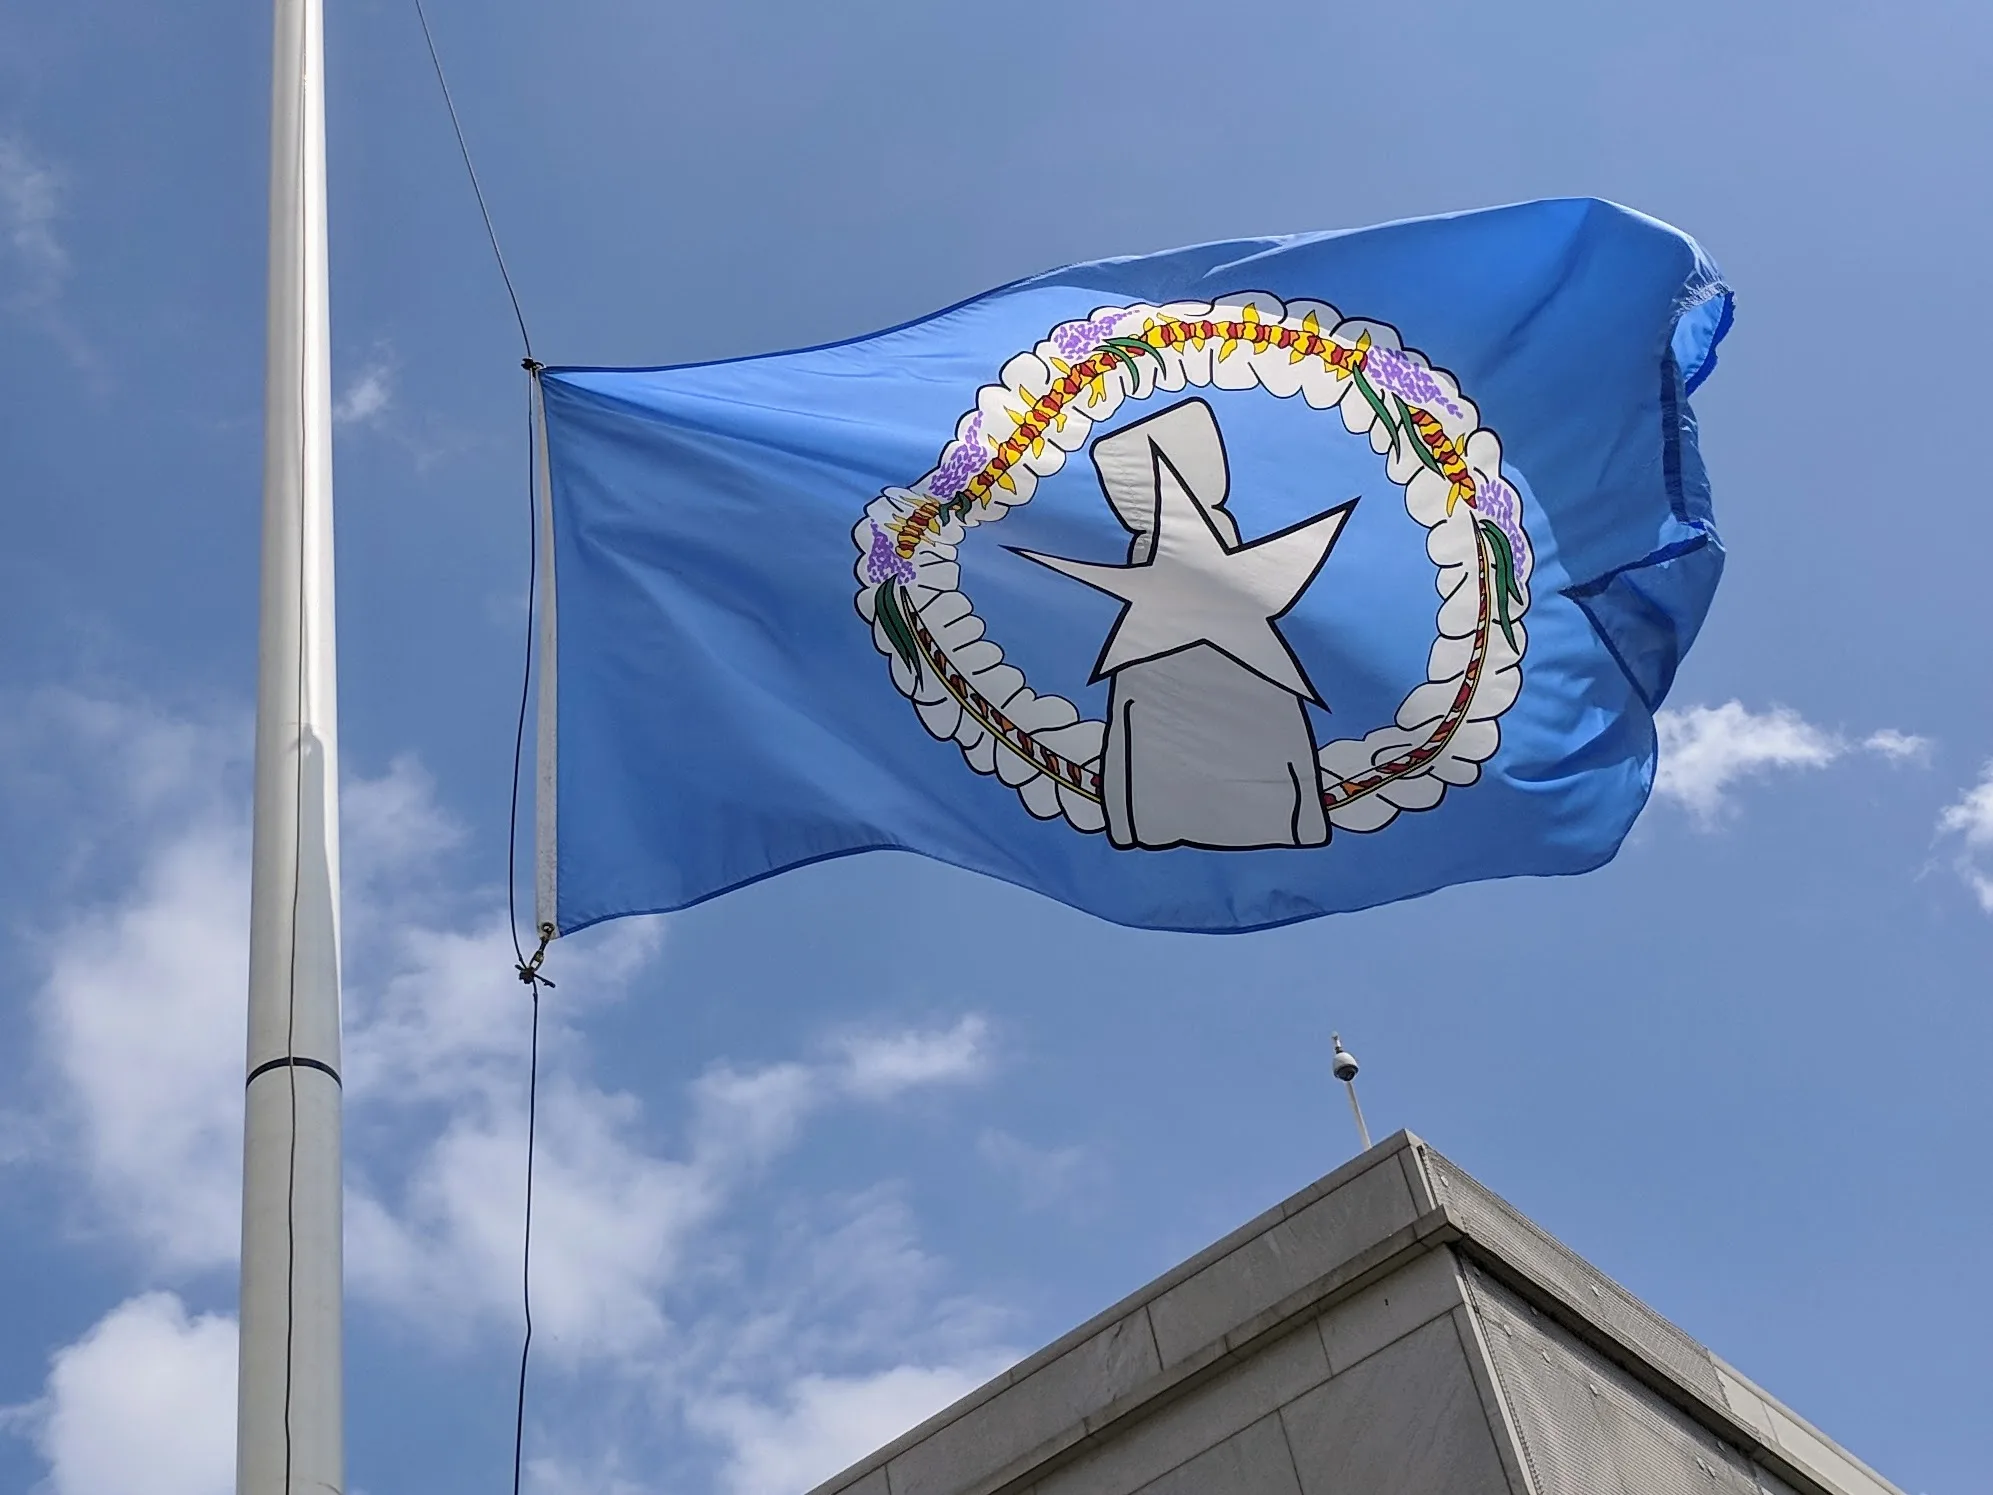 Statehood and the struggle of underrepresentation in the Northern Mariana Islands